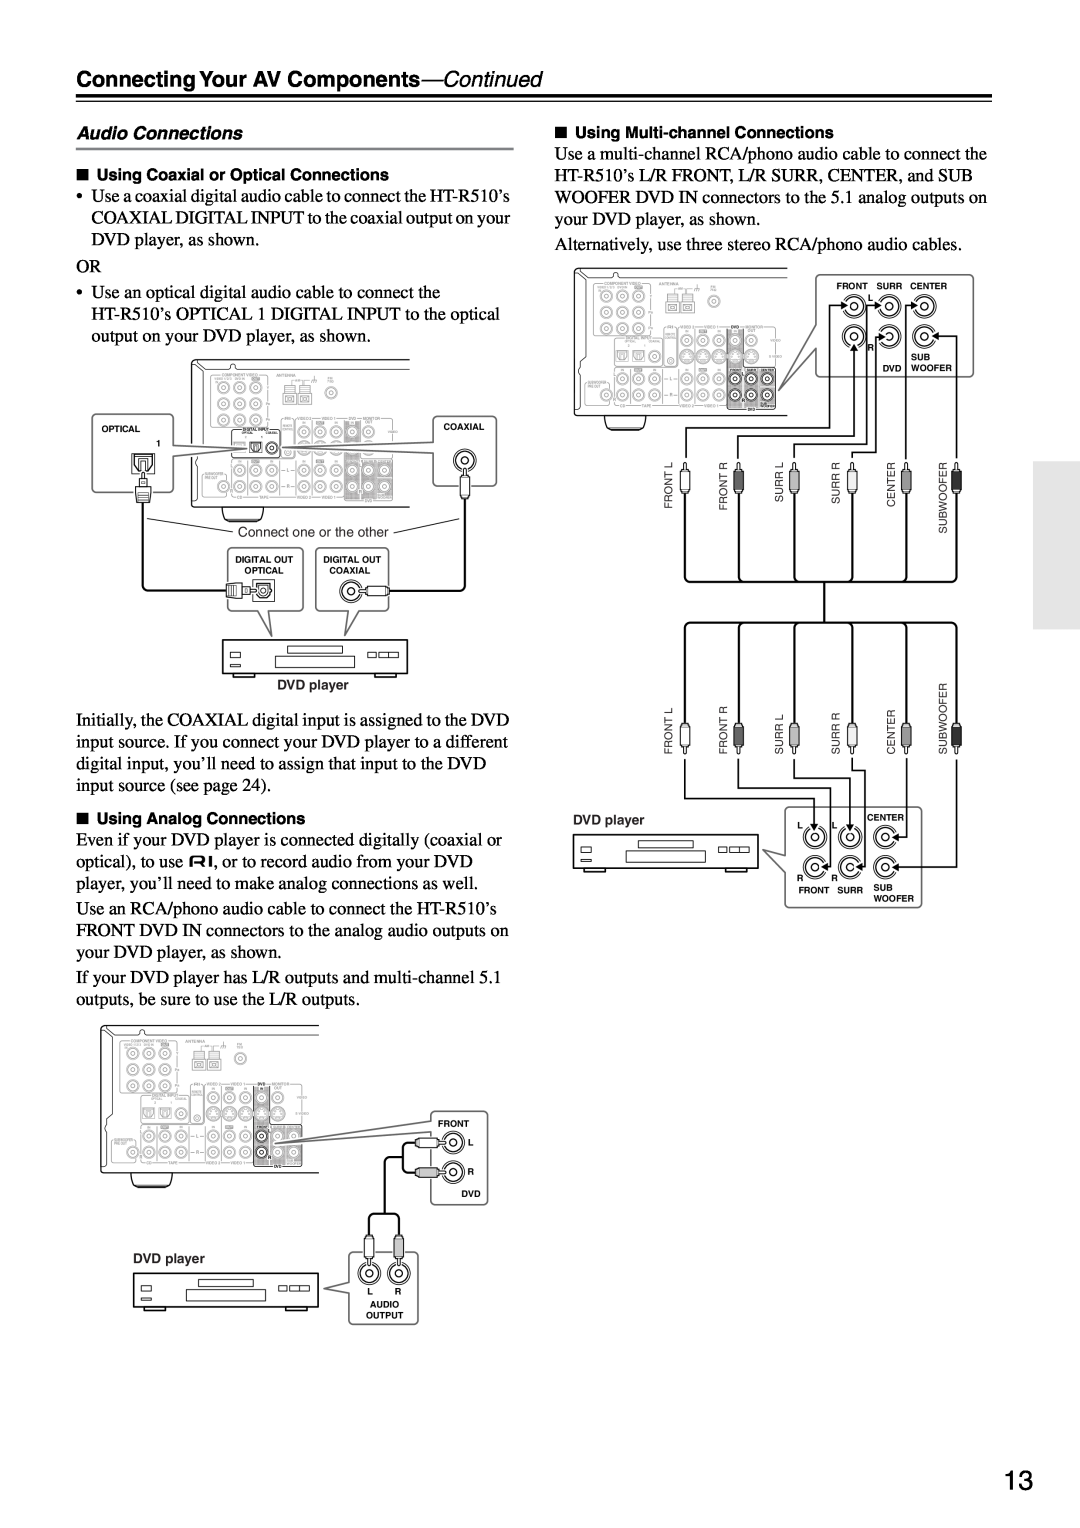 Onkyo HT-R510 instruction manual Connecting Your AV Components-Continued, Audio Connections 